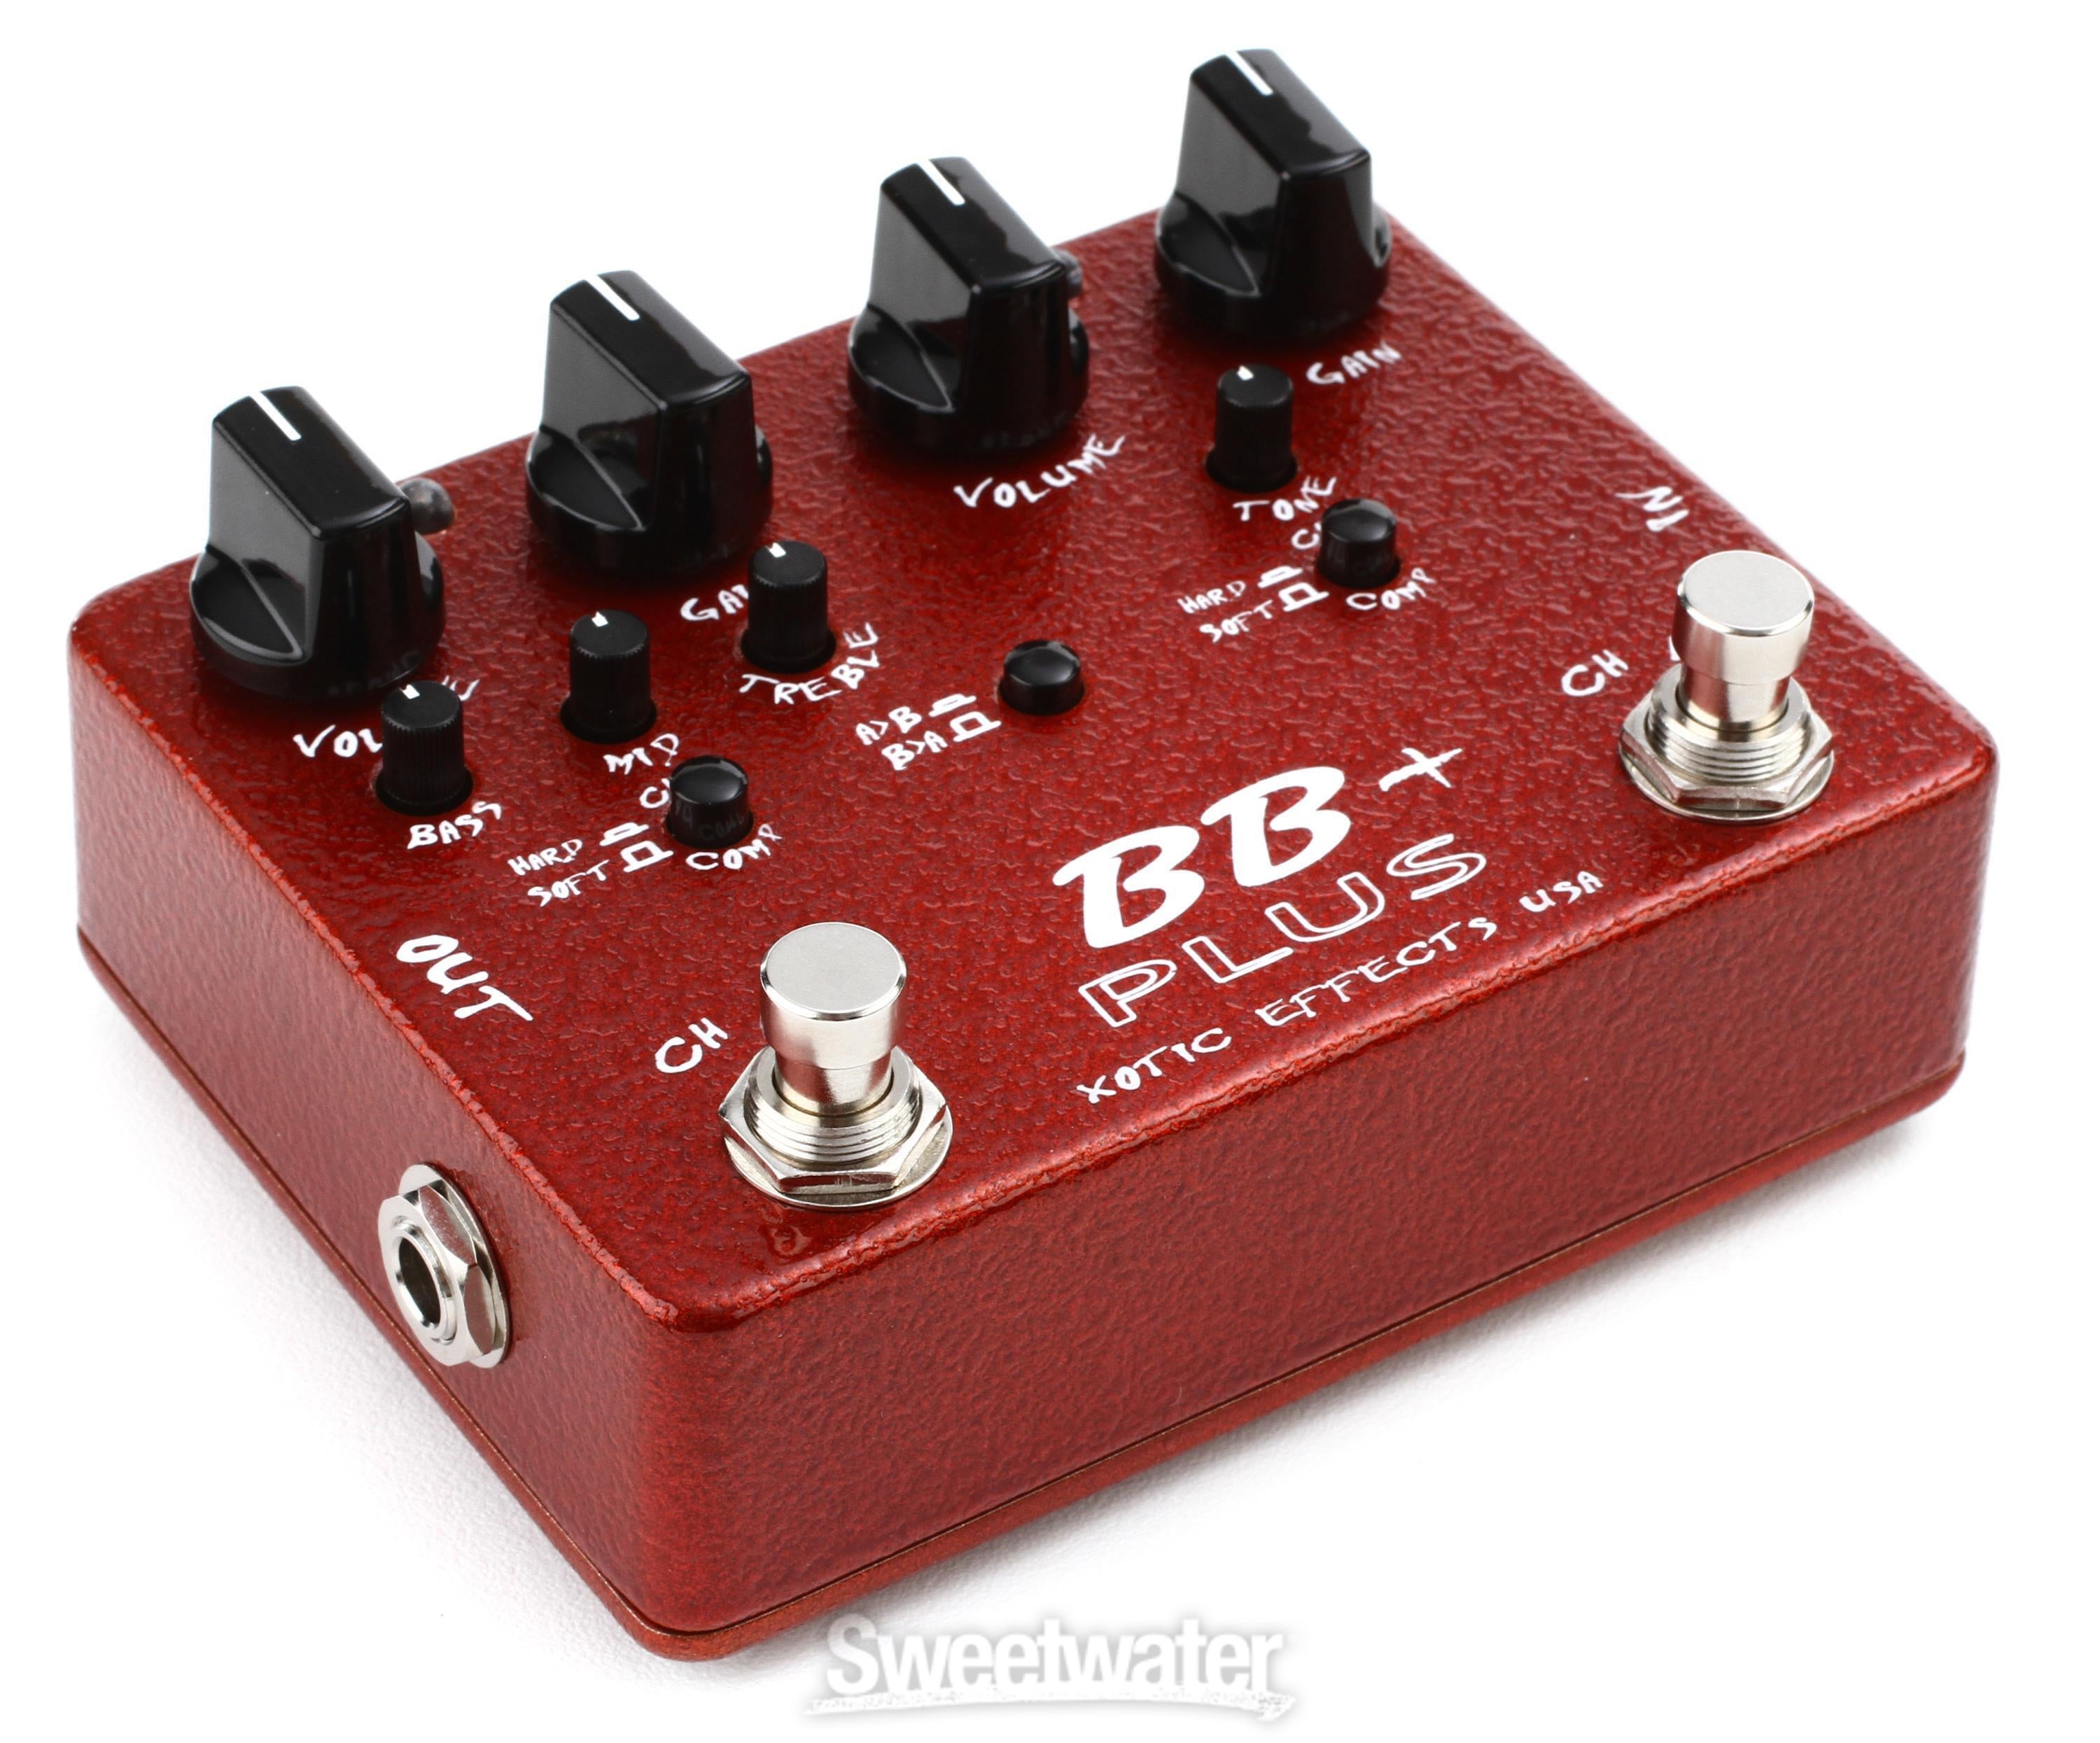 Xotic BB Plus Preamp and Boost Pedal